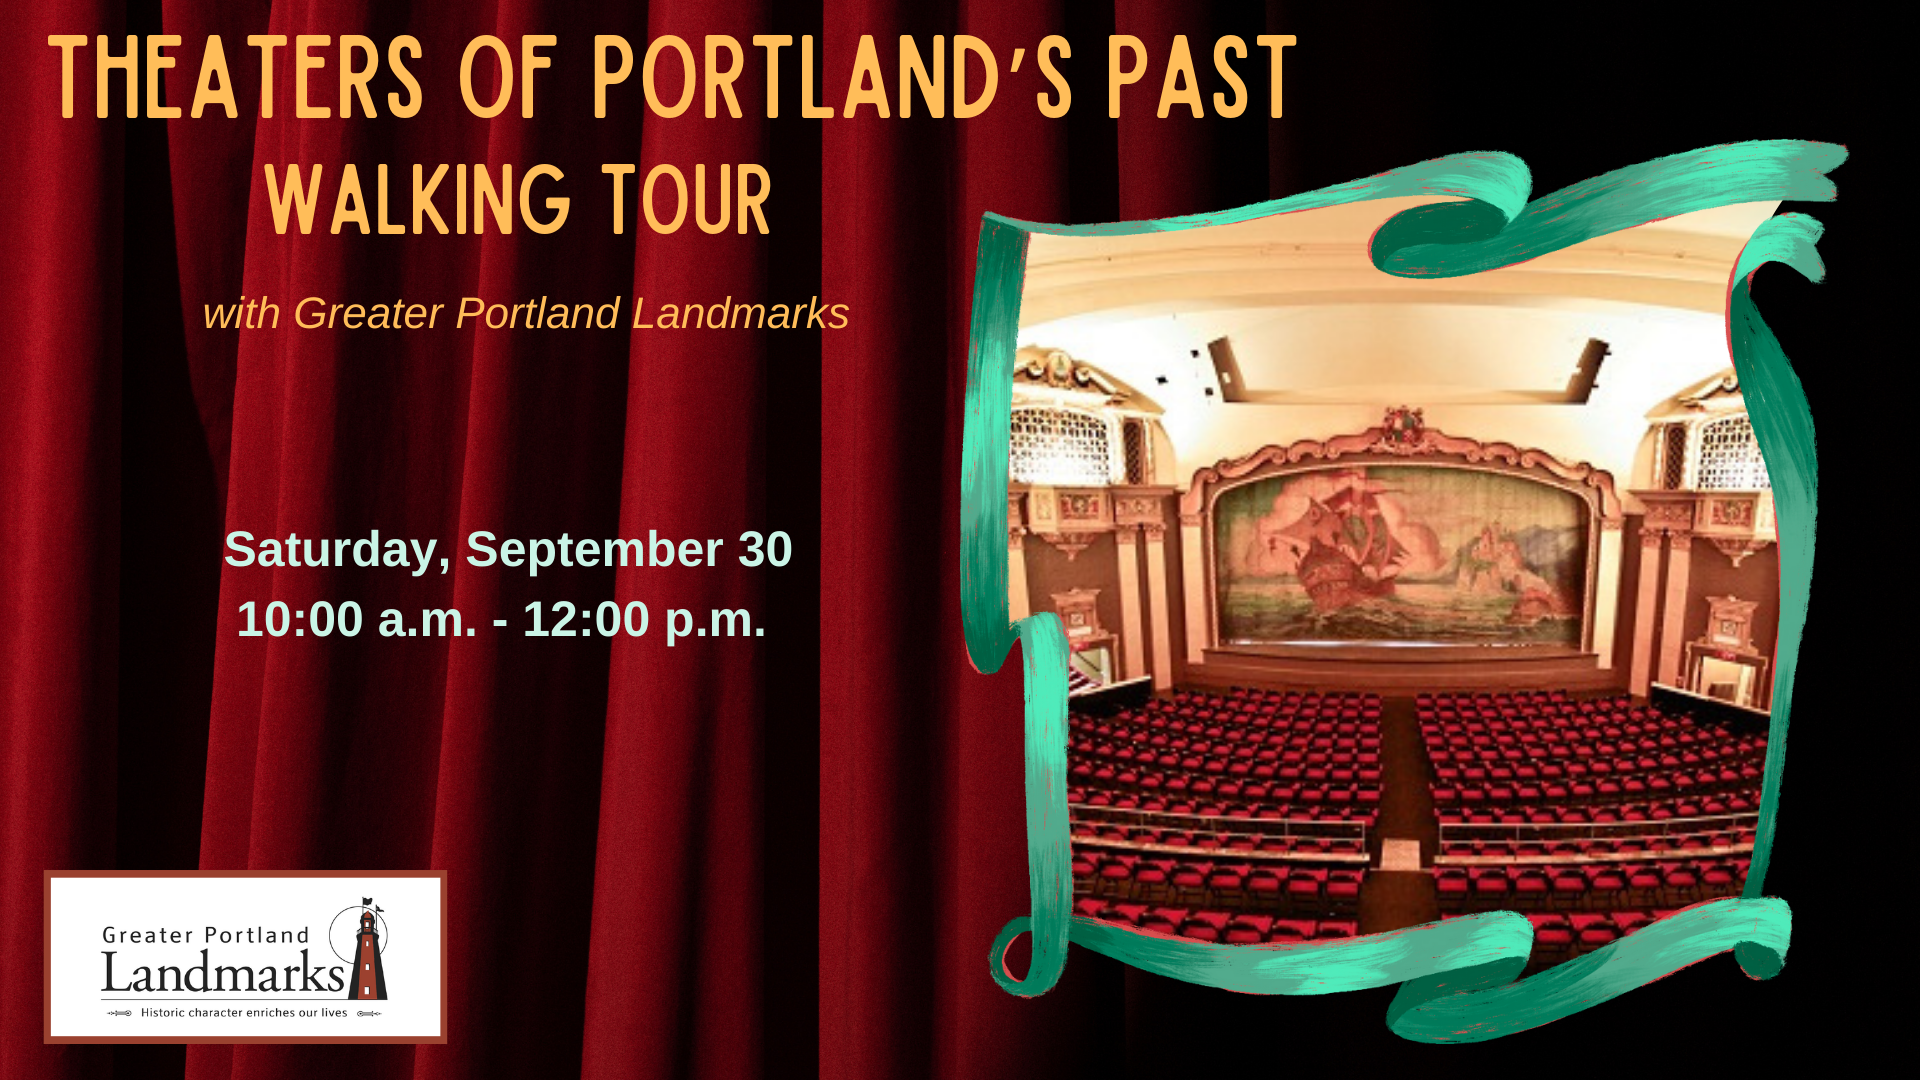 Theaters of Portland's Past walking tour with Greater Portland Landmarks